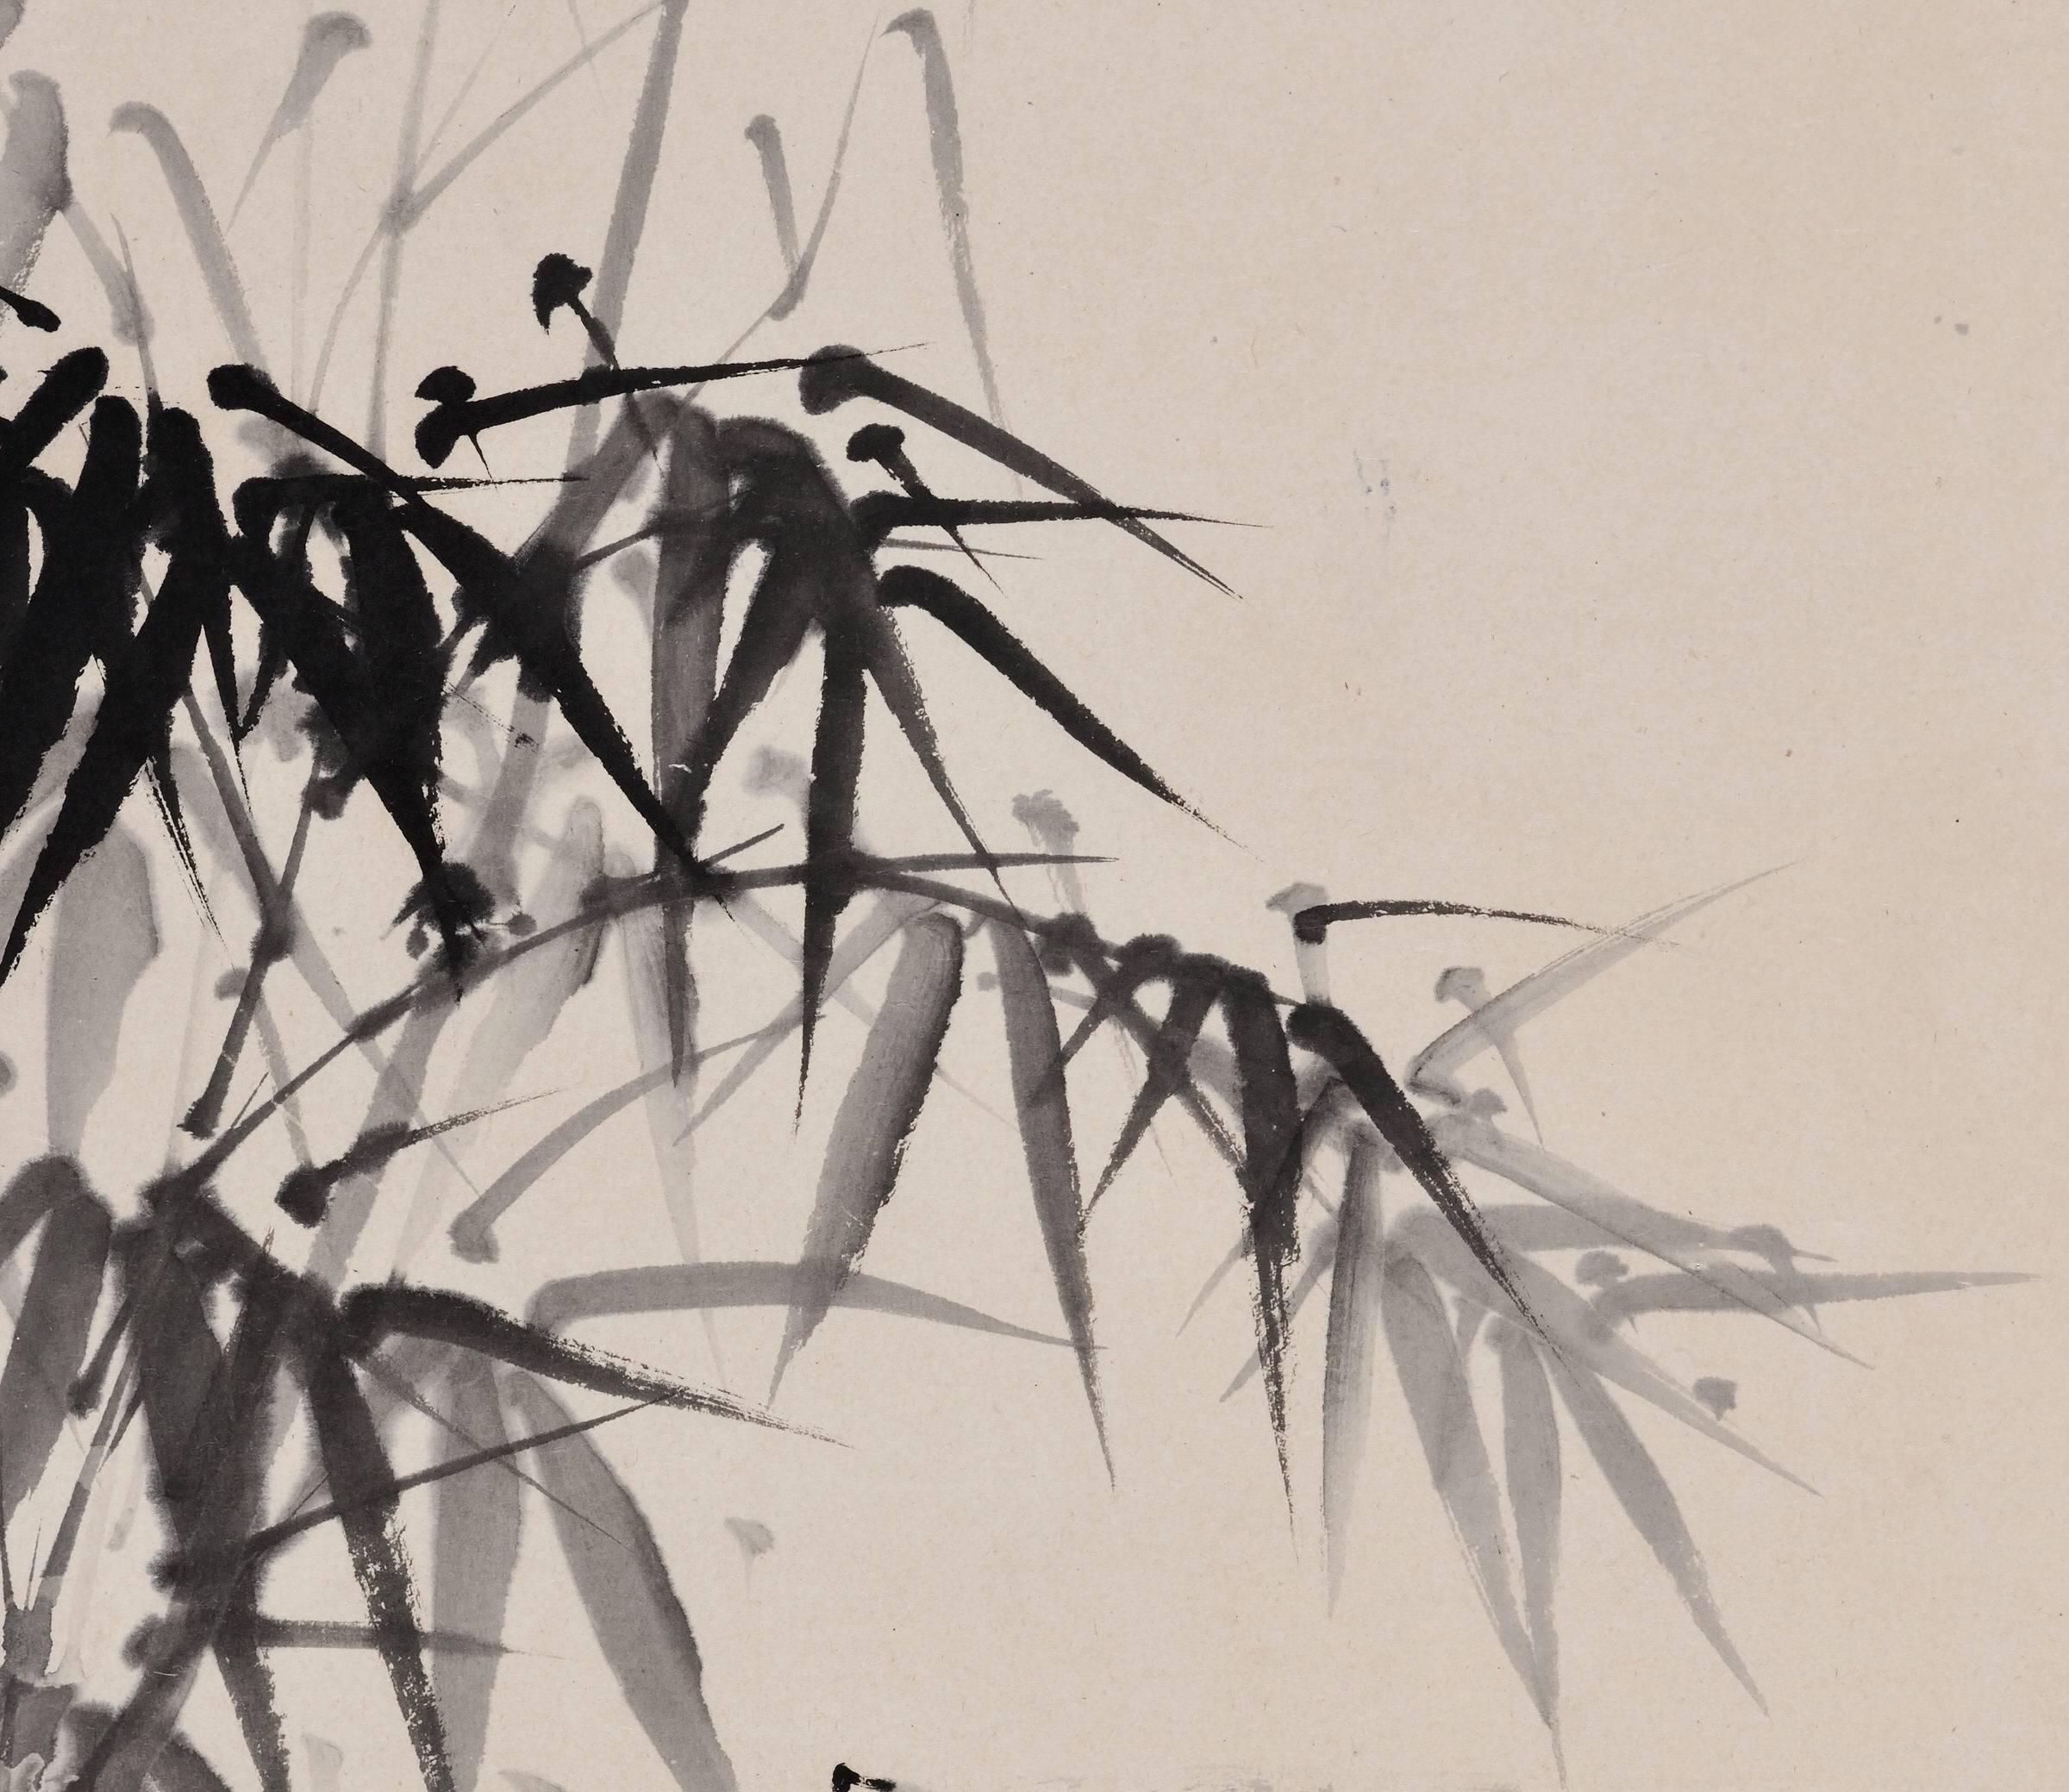 Cho Tosai (1713-1786)

“Bamboo”

Wall panel, ink on paper.

Seal: Choyo 

Dimensions:
129 cm x 39 cm x 2 cm (51” x 15.5” x .75”)

This bamboo painting by Cho Tosai demonstrates great mastery of brush and ink. Spontaneous and compelling